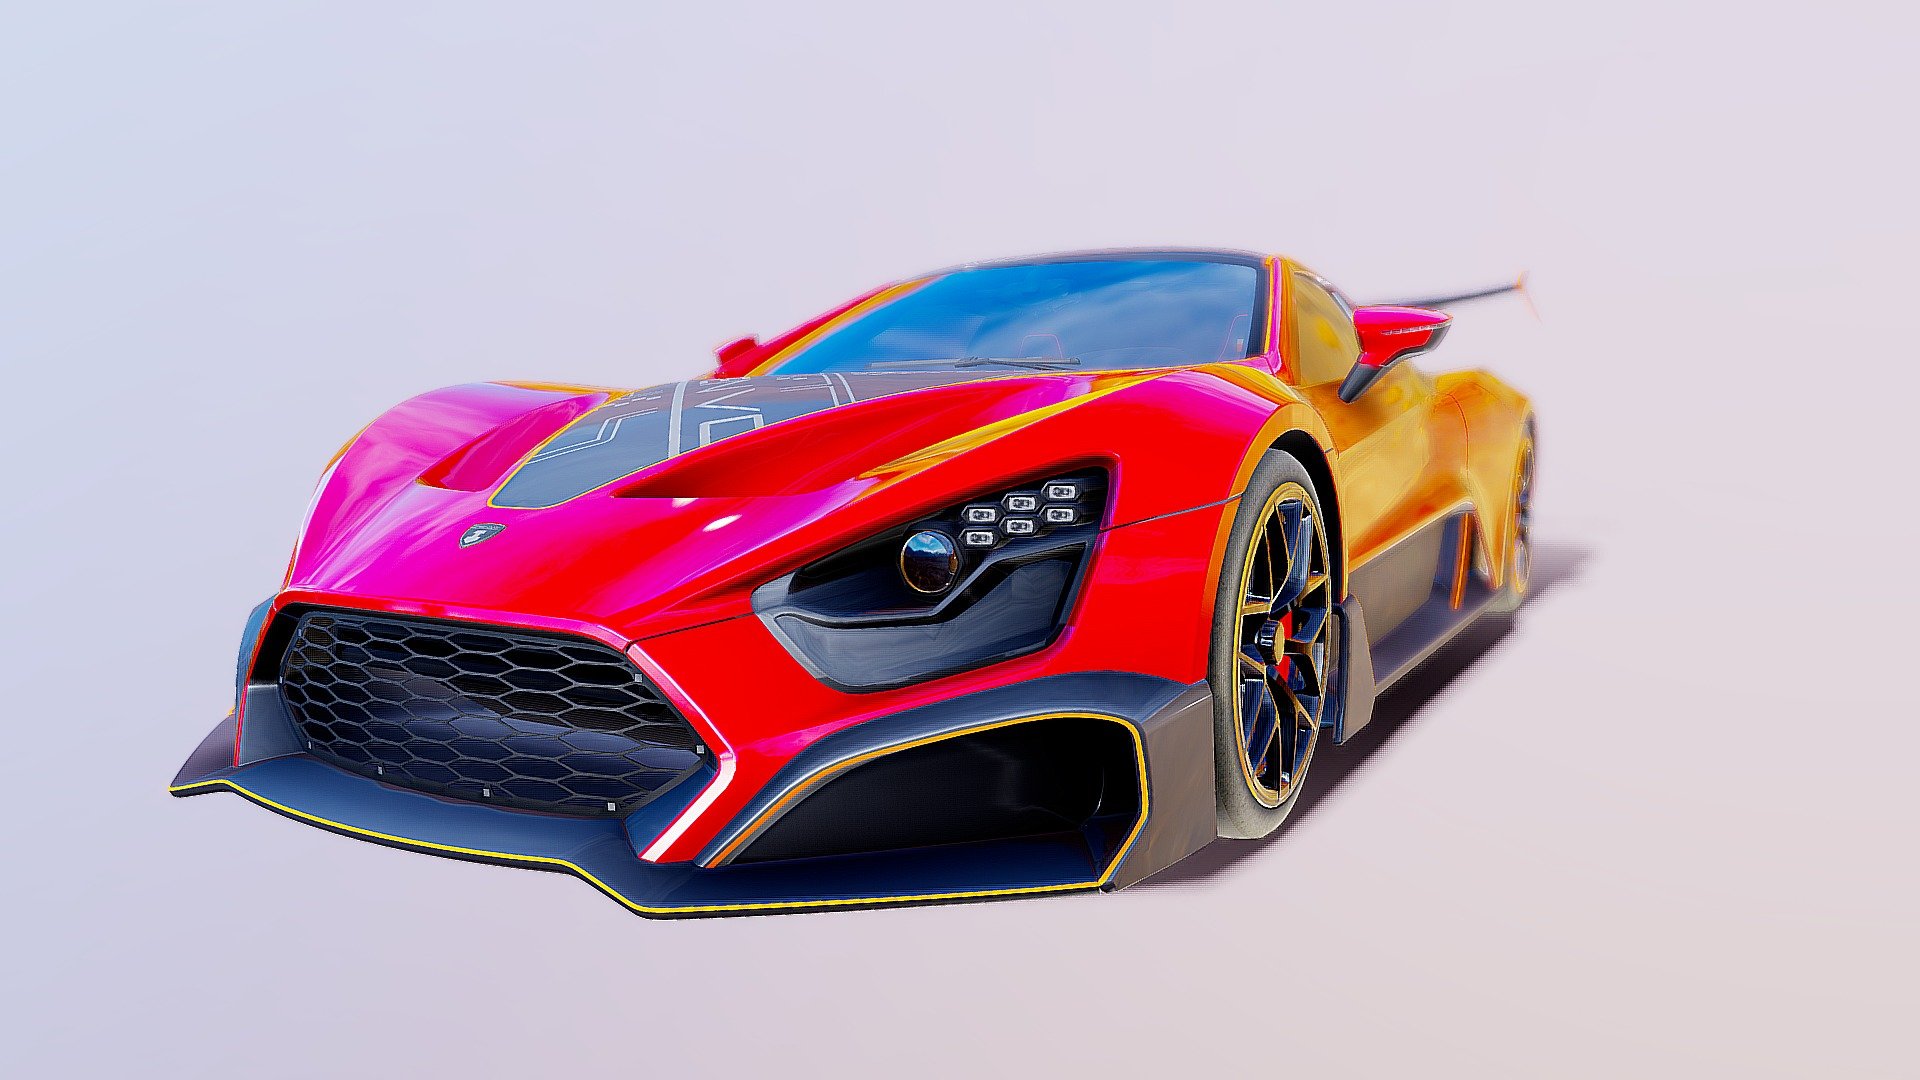 The most remarkable thing about the Zenvo TSR-S isn't its four-figure power output, its seven-figure price tag, nor the fact that its V-8 engine is force fed by two superchargers. Neither is it its claimed 6.8-second zero-to-124-mph time, which matches McLaren's claim of the Senna and is sufficient to make it one of the quickest street-legal cars on the planet. It's not even that Zenvo remains Denmark's only native automaker, despite having built only 15 cars since its foundation in 2009. While all of these points are certainly interesting, none gets close to the crowd-drawing effect of the TSR-S's unique aerodynamics.

THANKS FOR 200 FOLLOWERSSSSSSSS - 2020 Zenvo TSR-S | Special Thanks 200 Followers - Download Free 3D model by kevin (ケビン) (@sohyalebret) 3d model